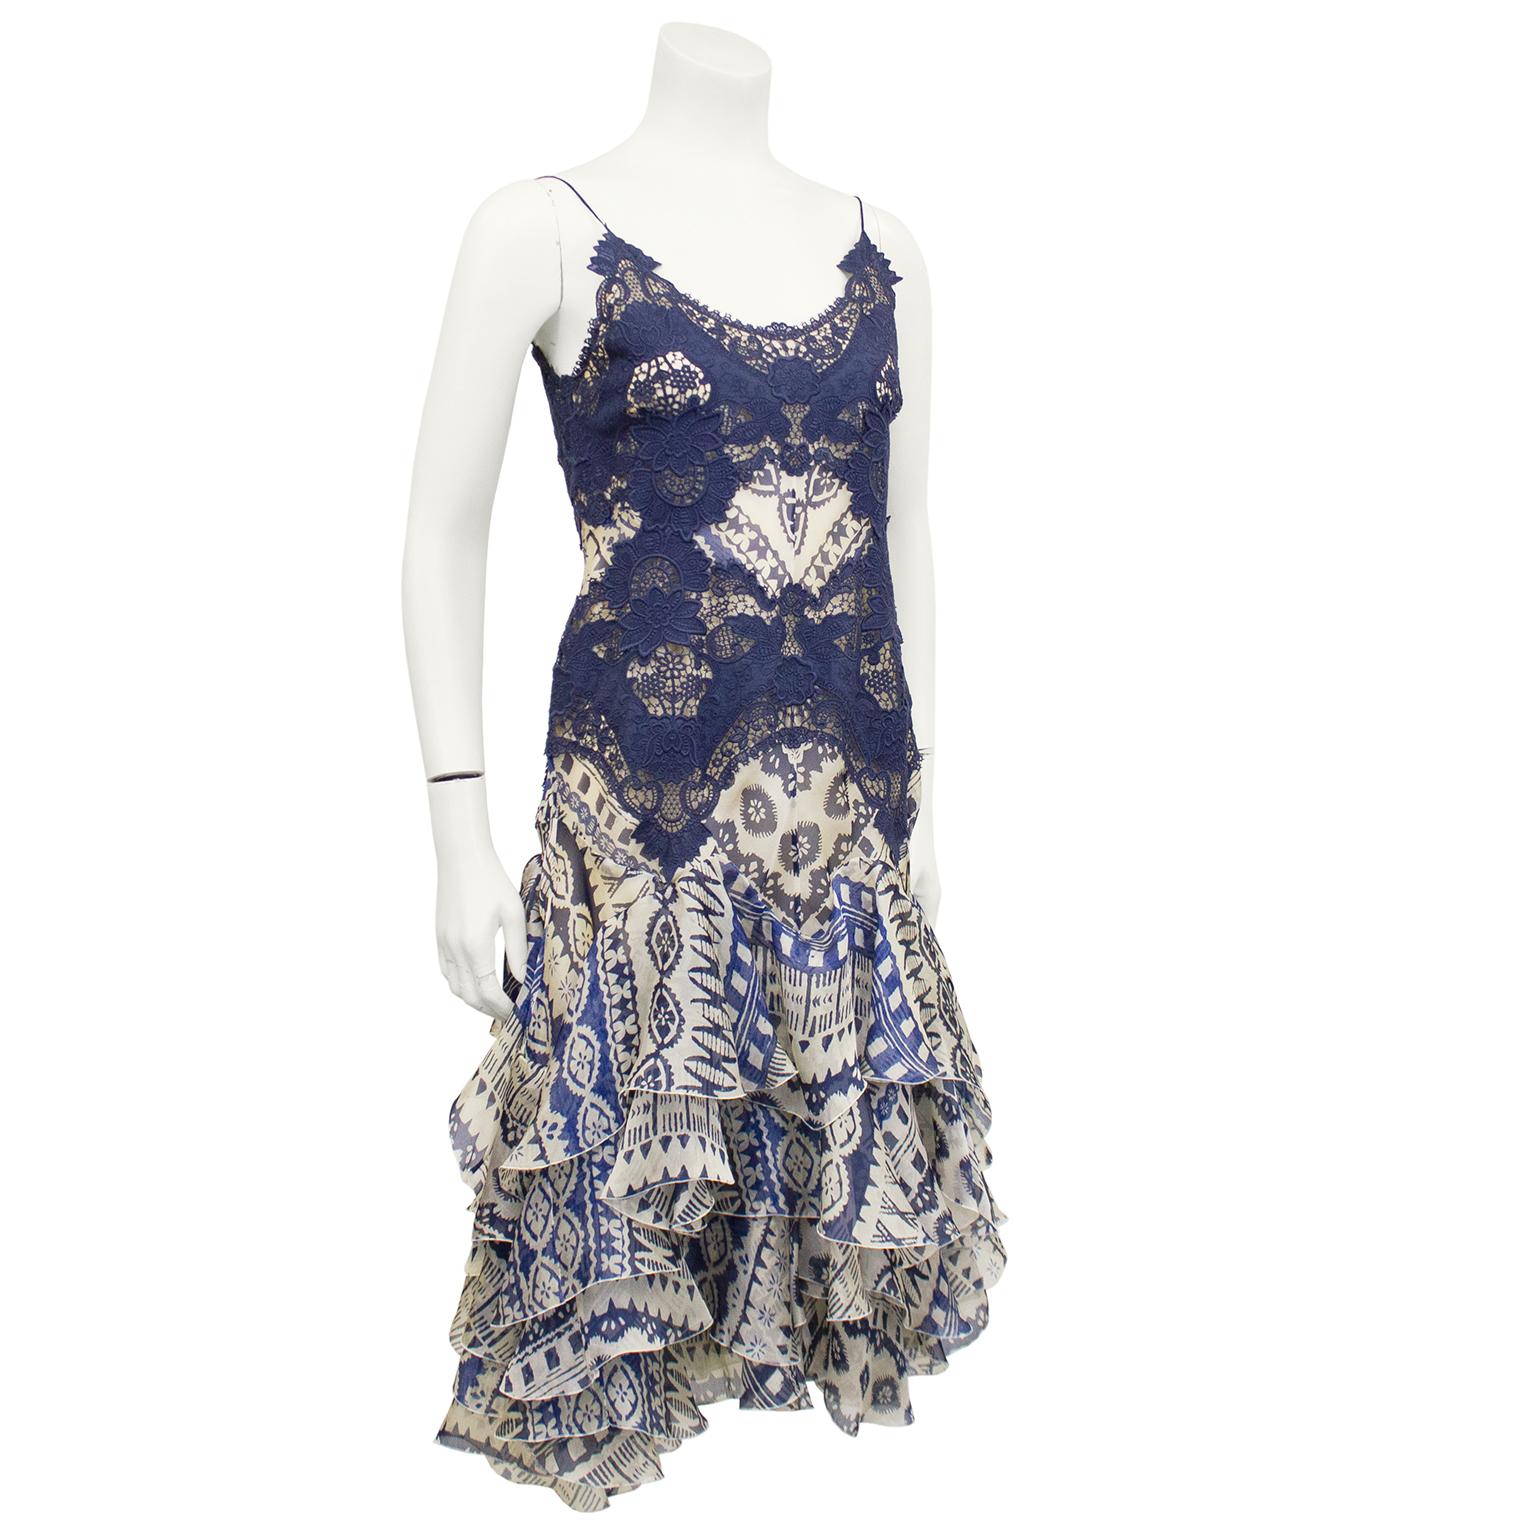 Alexander McQueen cocktail dress from the early 2000's. Blue lace bodice on top of printed chiffon. Drop waist cascades into flounces of layered chiffon. Zipper up centre back. Excellent vintage condition. Fits like a US size 4. Perfect for an early